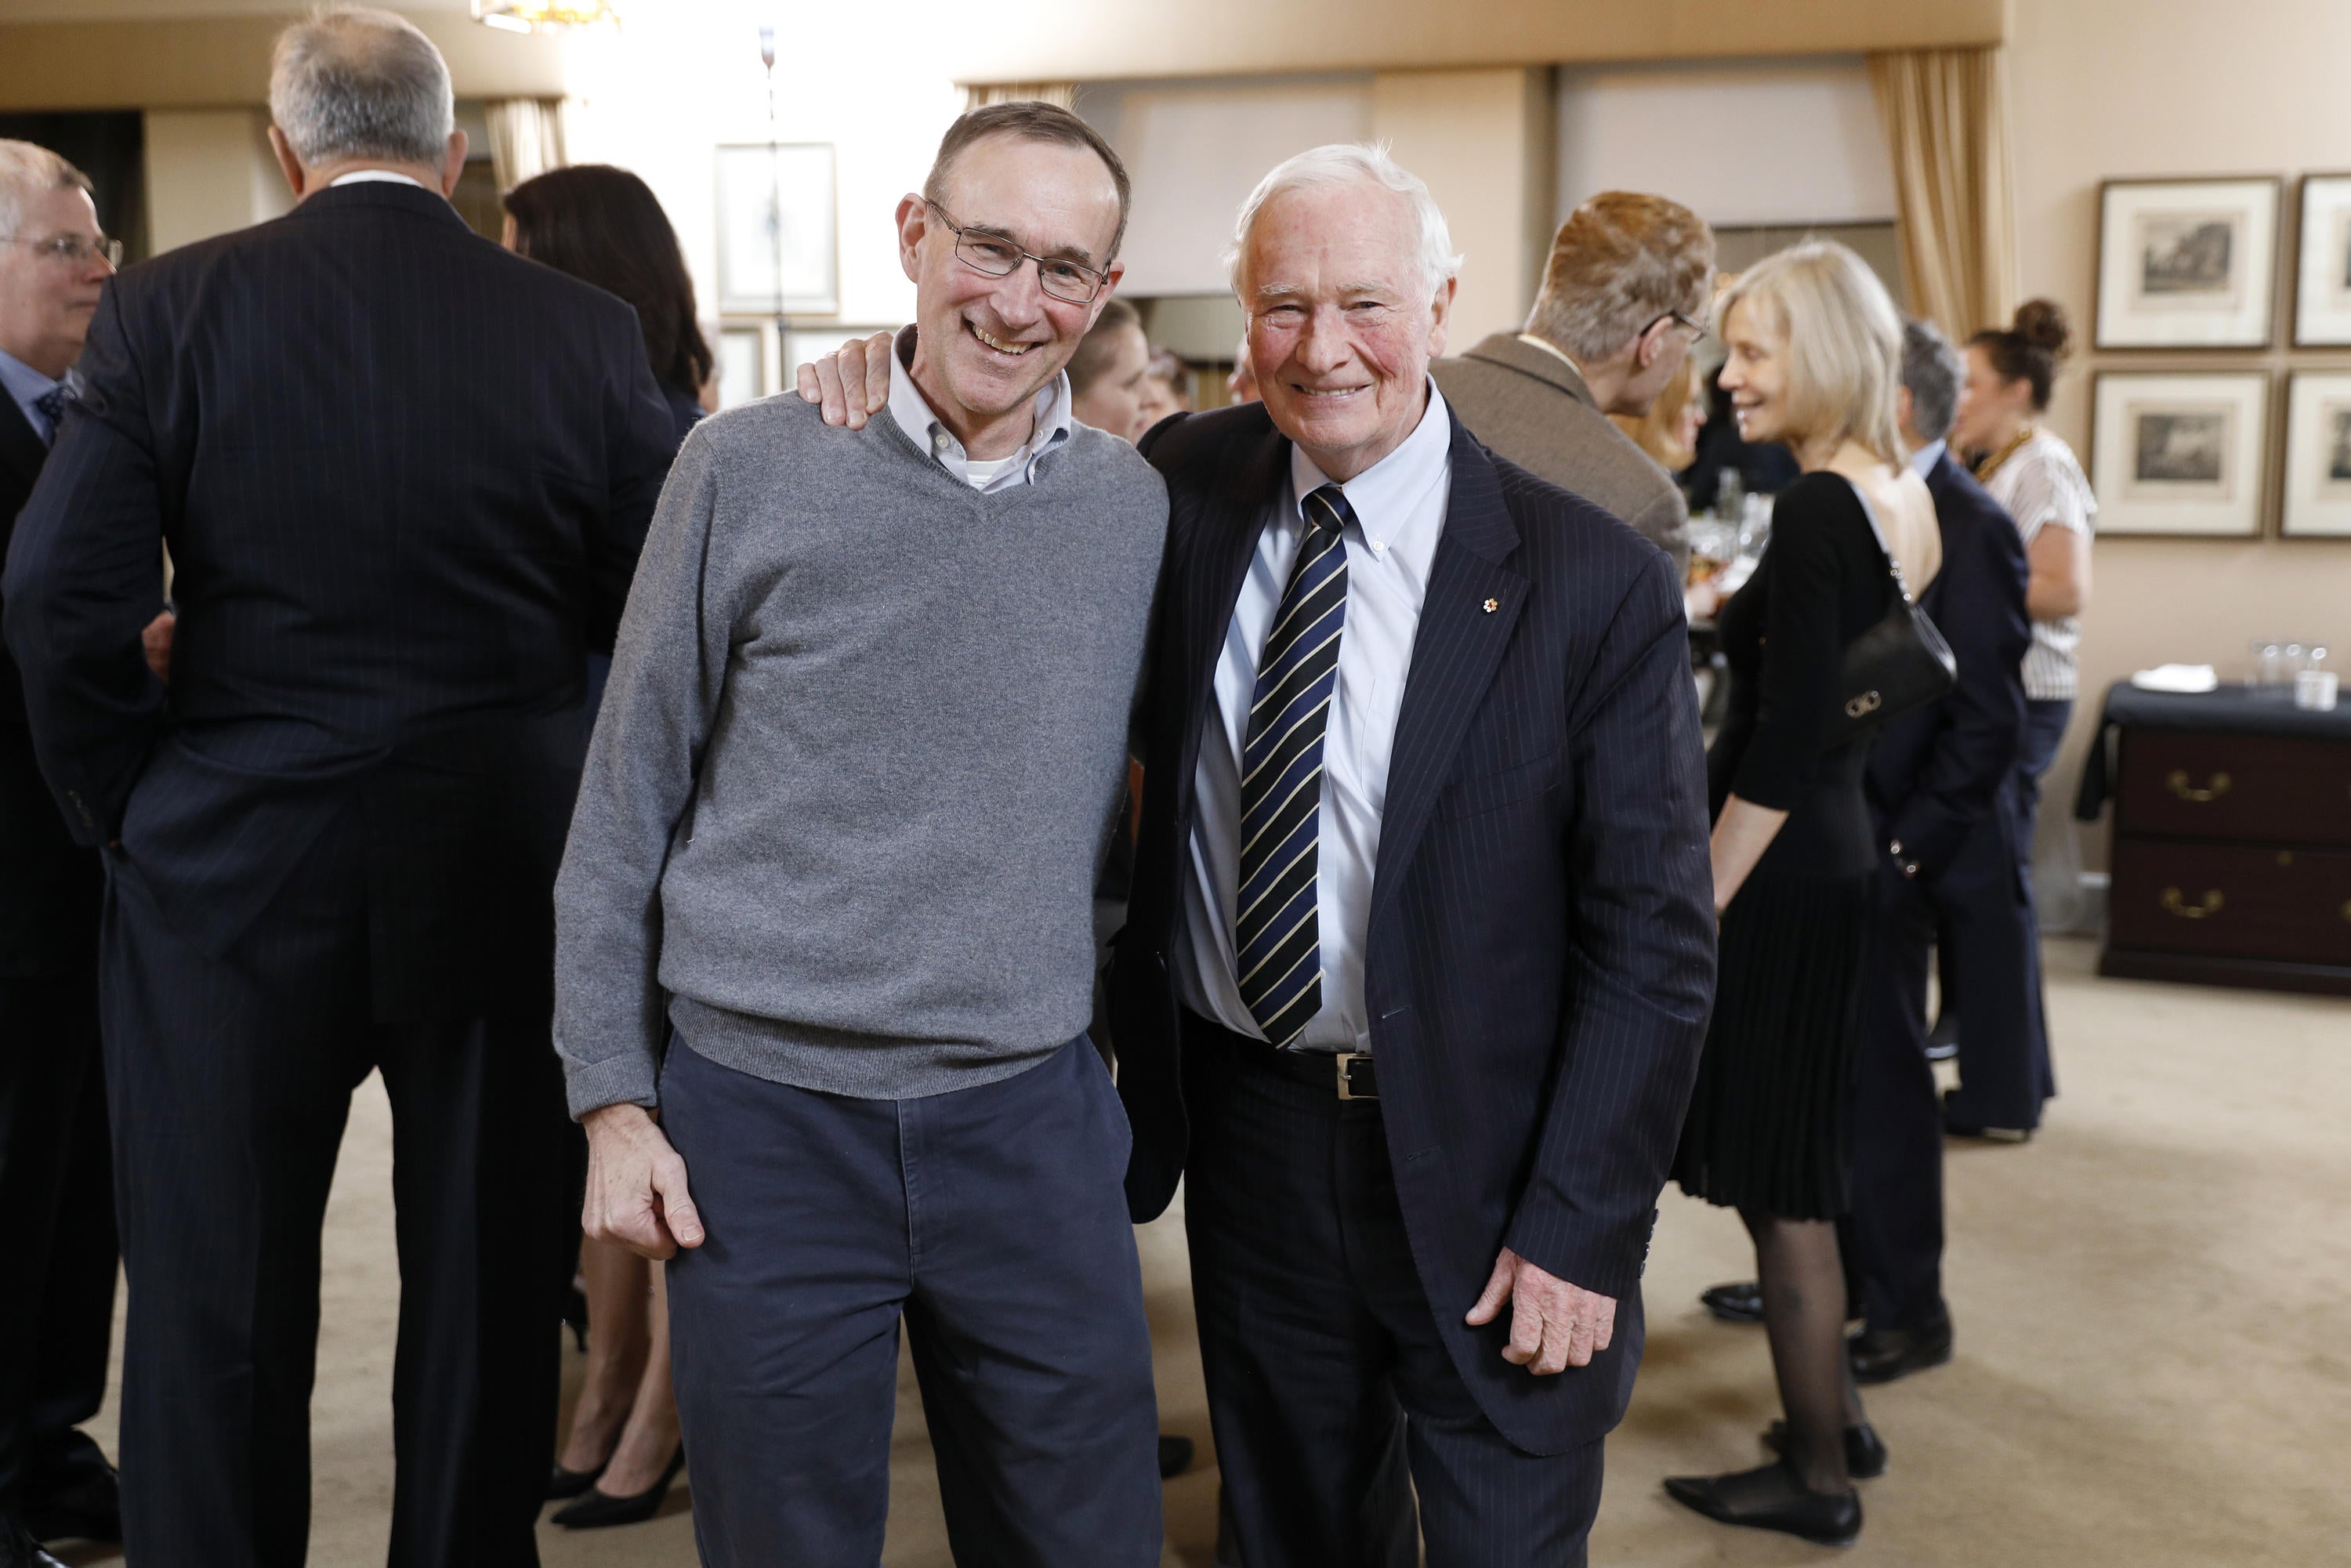 Raymond Laflamme with former University of Waterloo President and former Governor General, the Right Honourable David Johnston